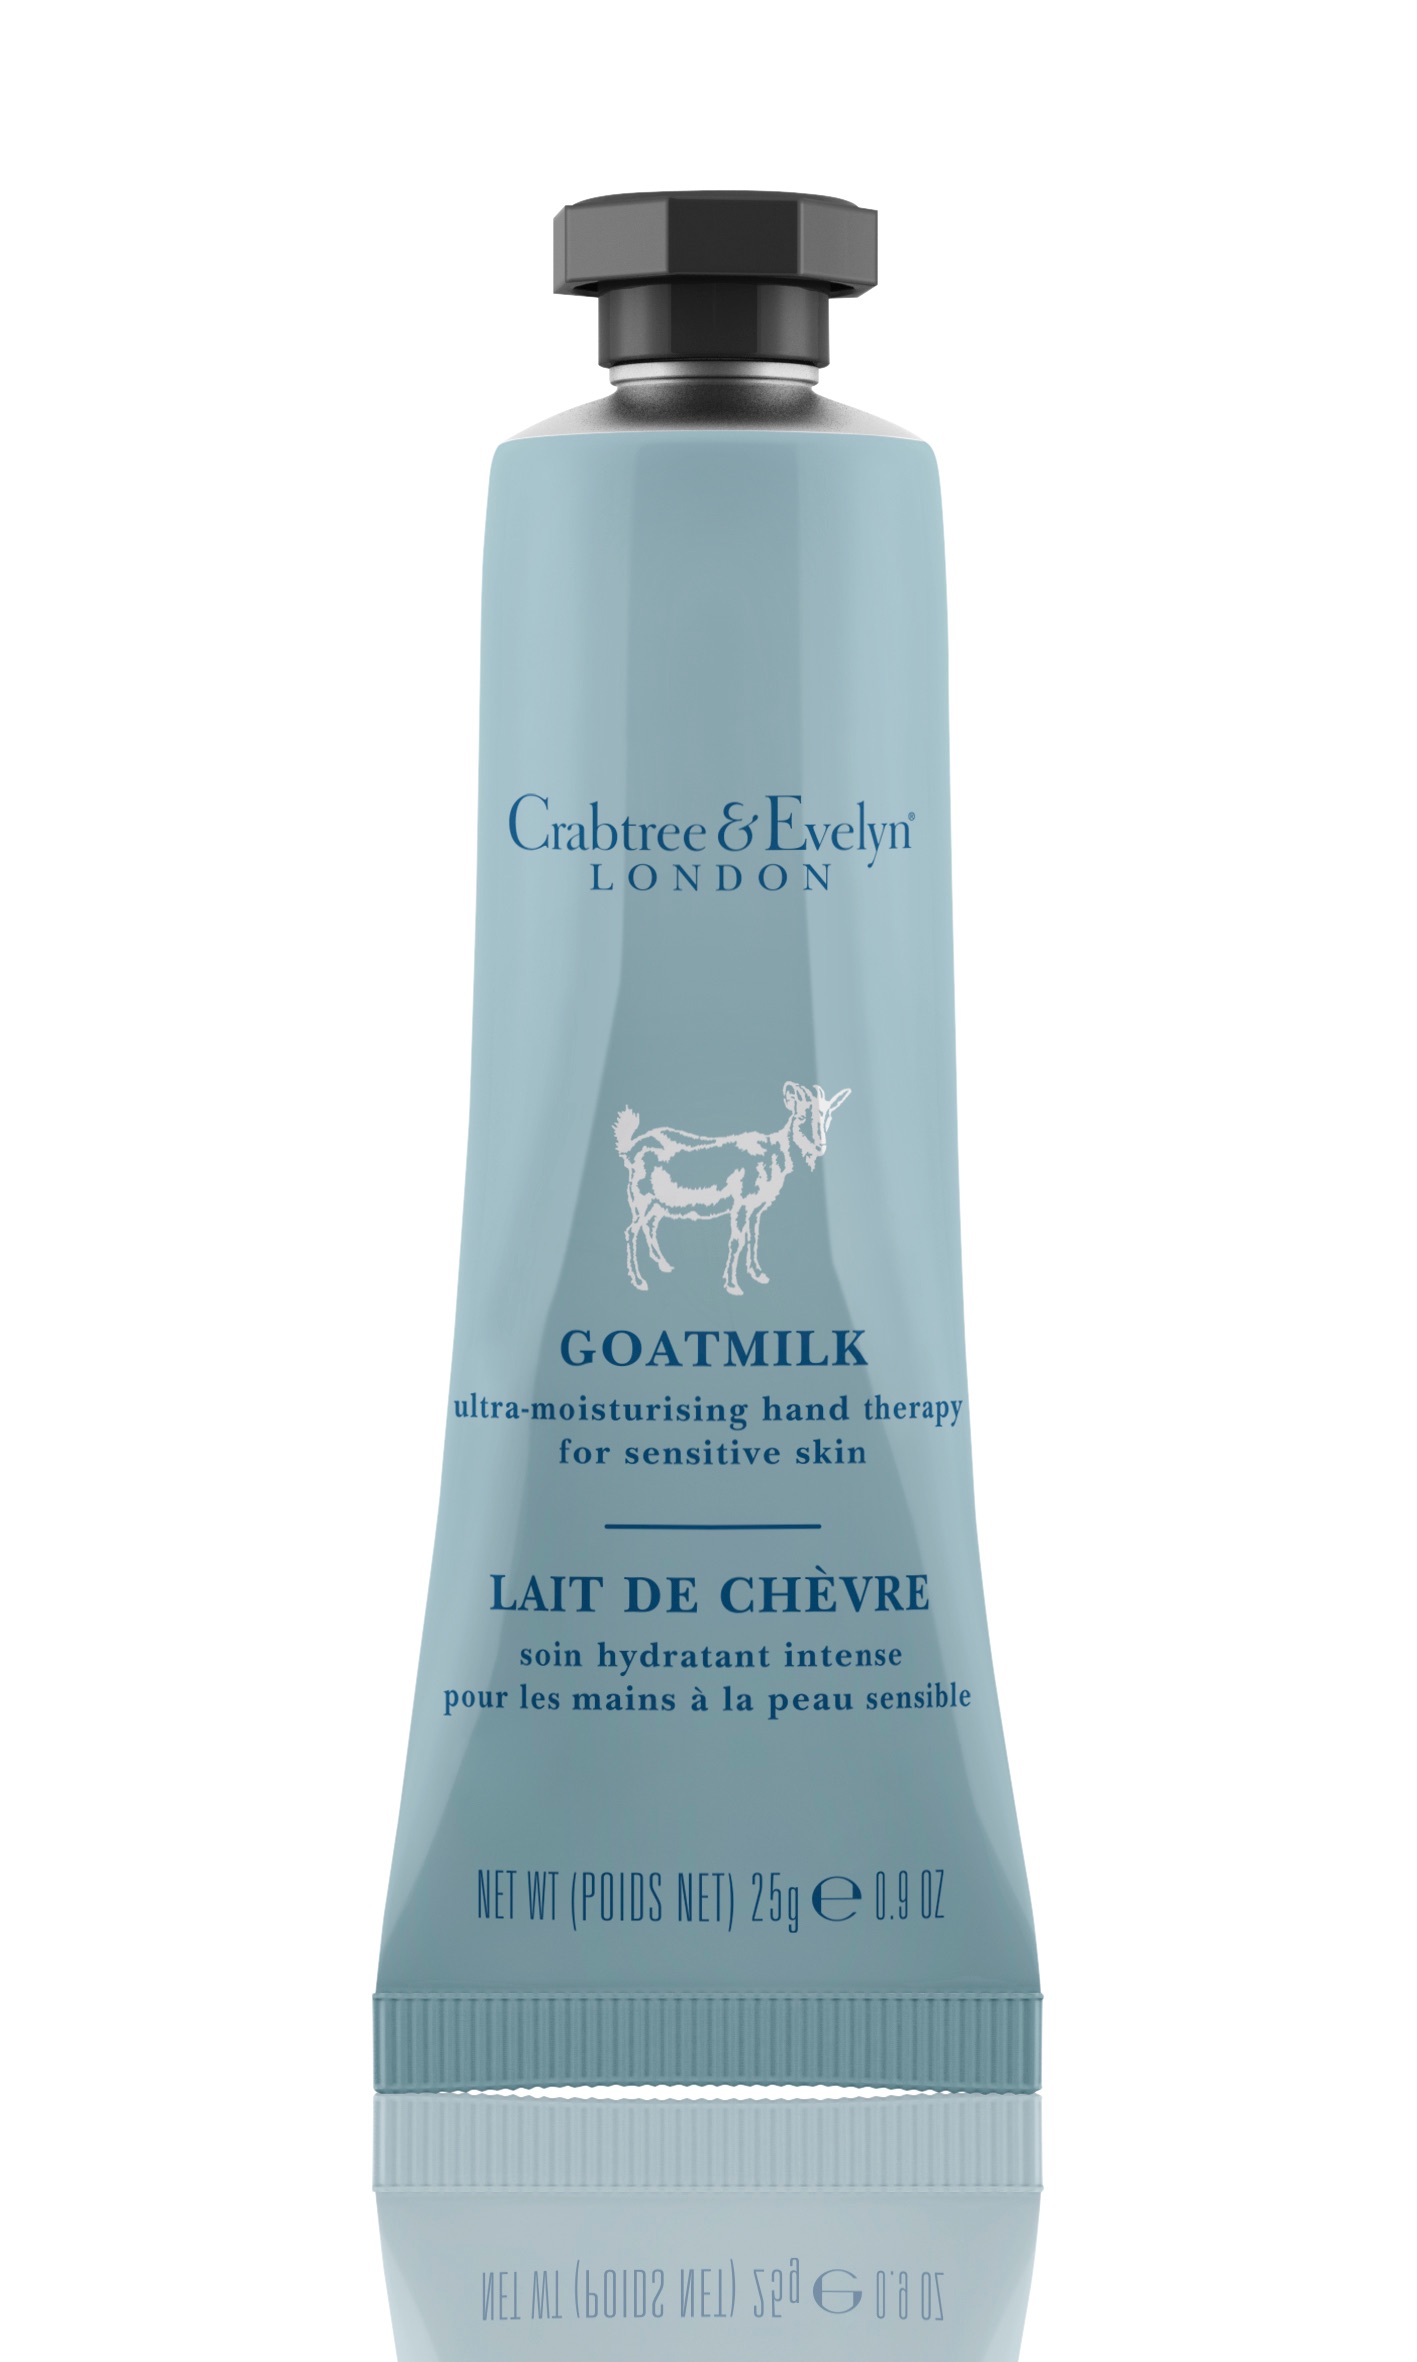 Crabtree & Evelyn Goatmilk Hand Therapy 25g